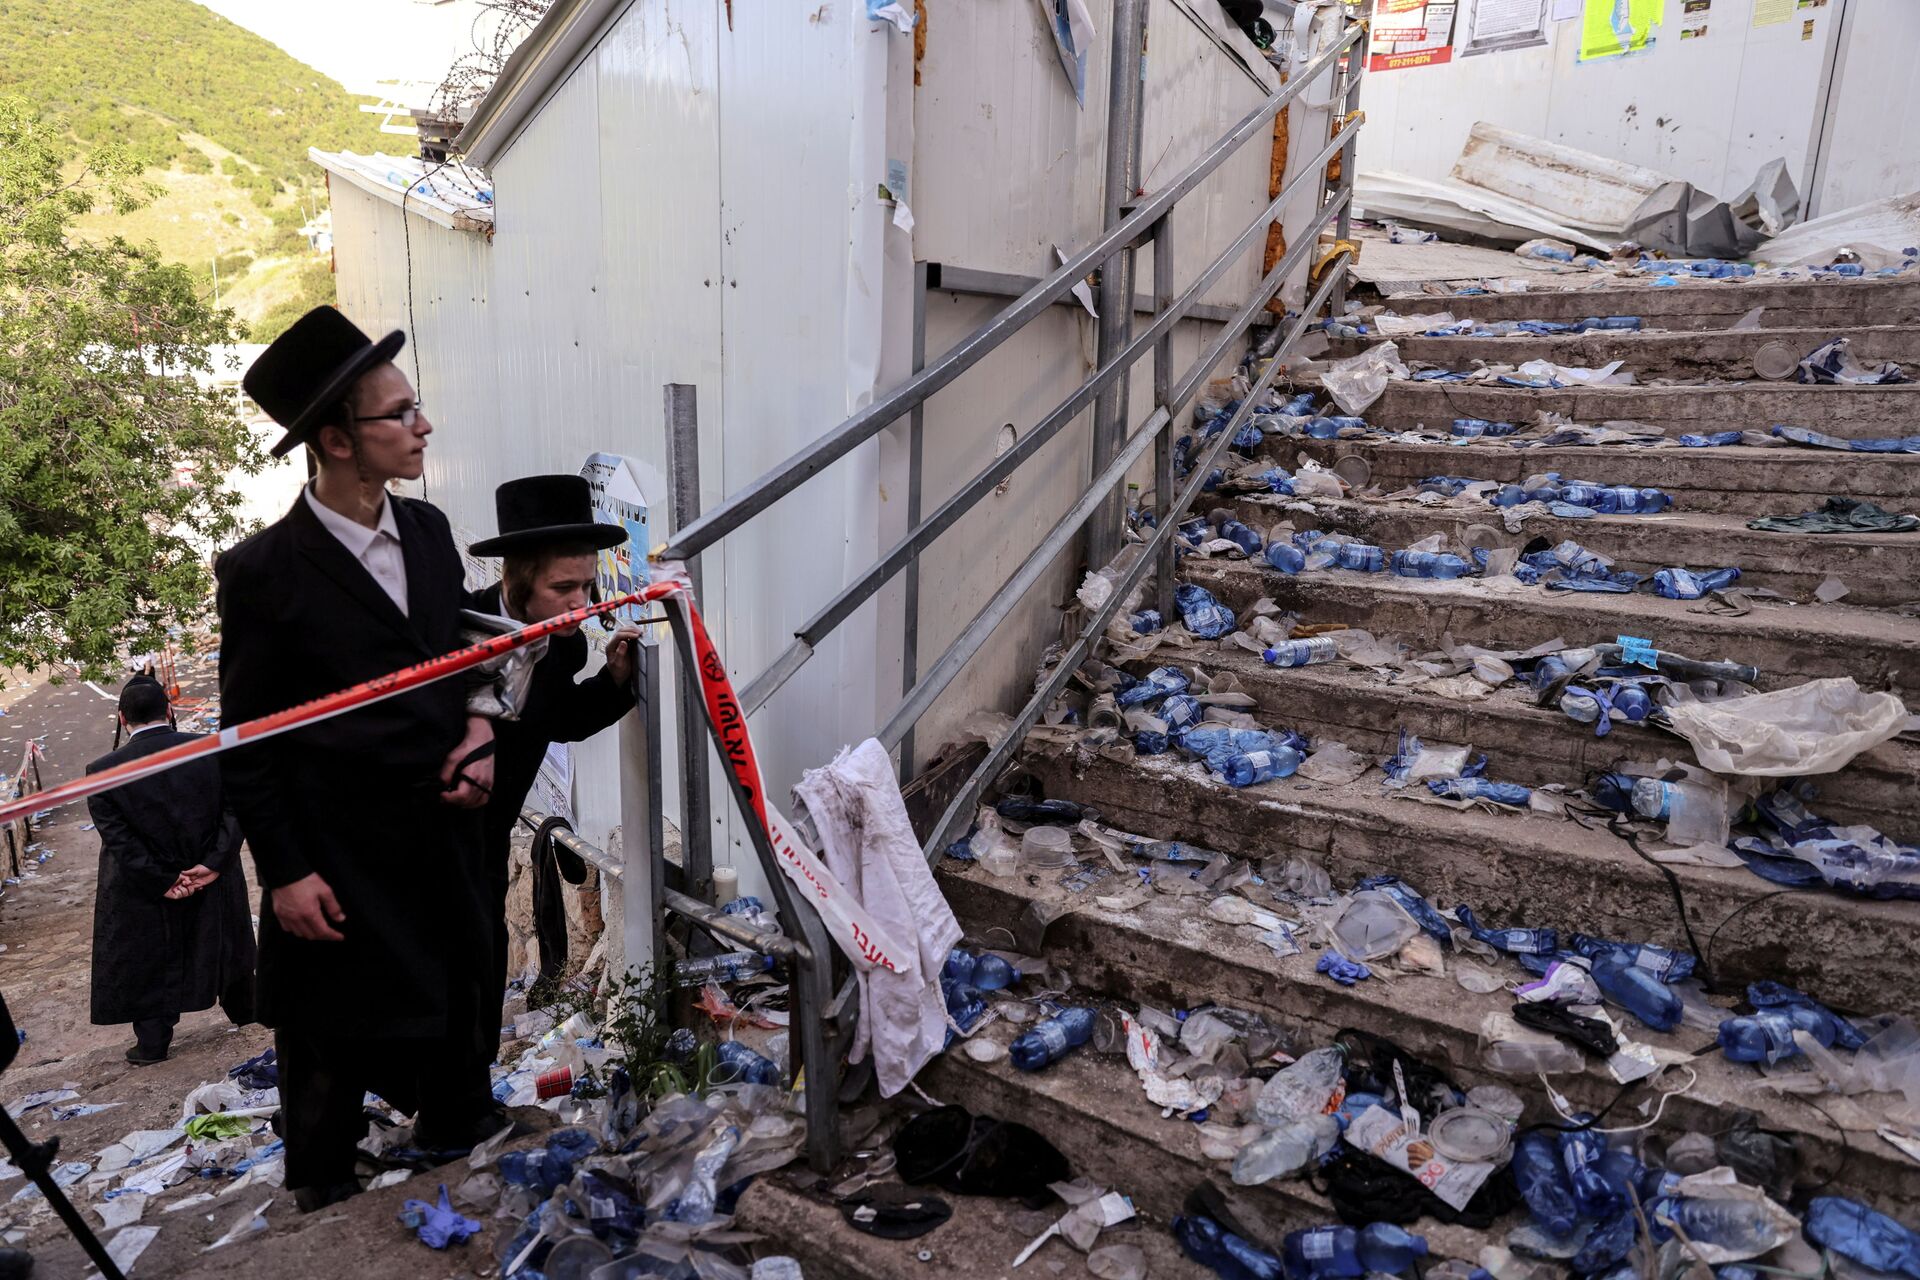 Ultra Orthodox Jews look at stairs with waste on it in Mount Meron, northern Israel, where fatalities were reported among the thousands of ultra-Orthodox Jews gathered at the tomb of a 2nd-century sage for annual commemorations that include all-night prayer and dance, April 30, 2021 - Sputnik International, 1920, 30.12.2021